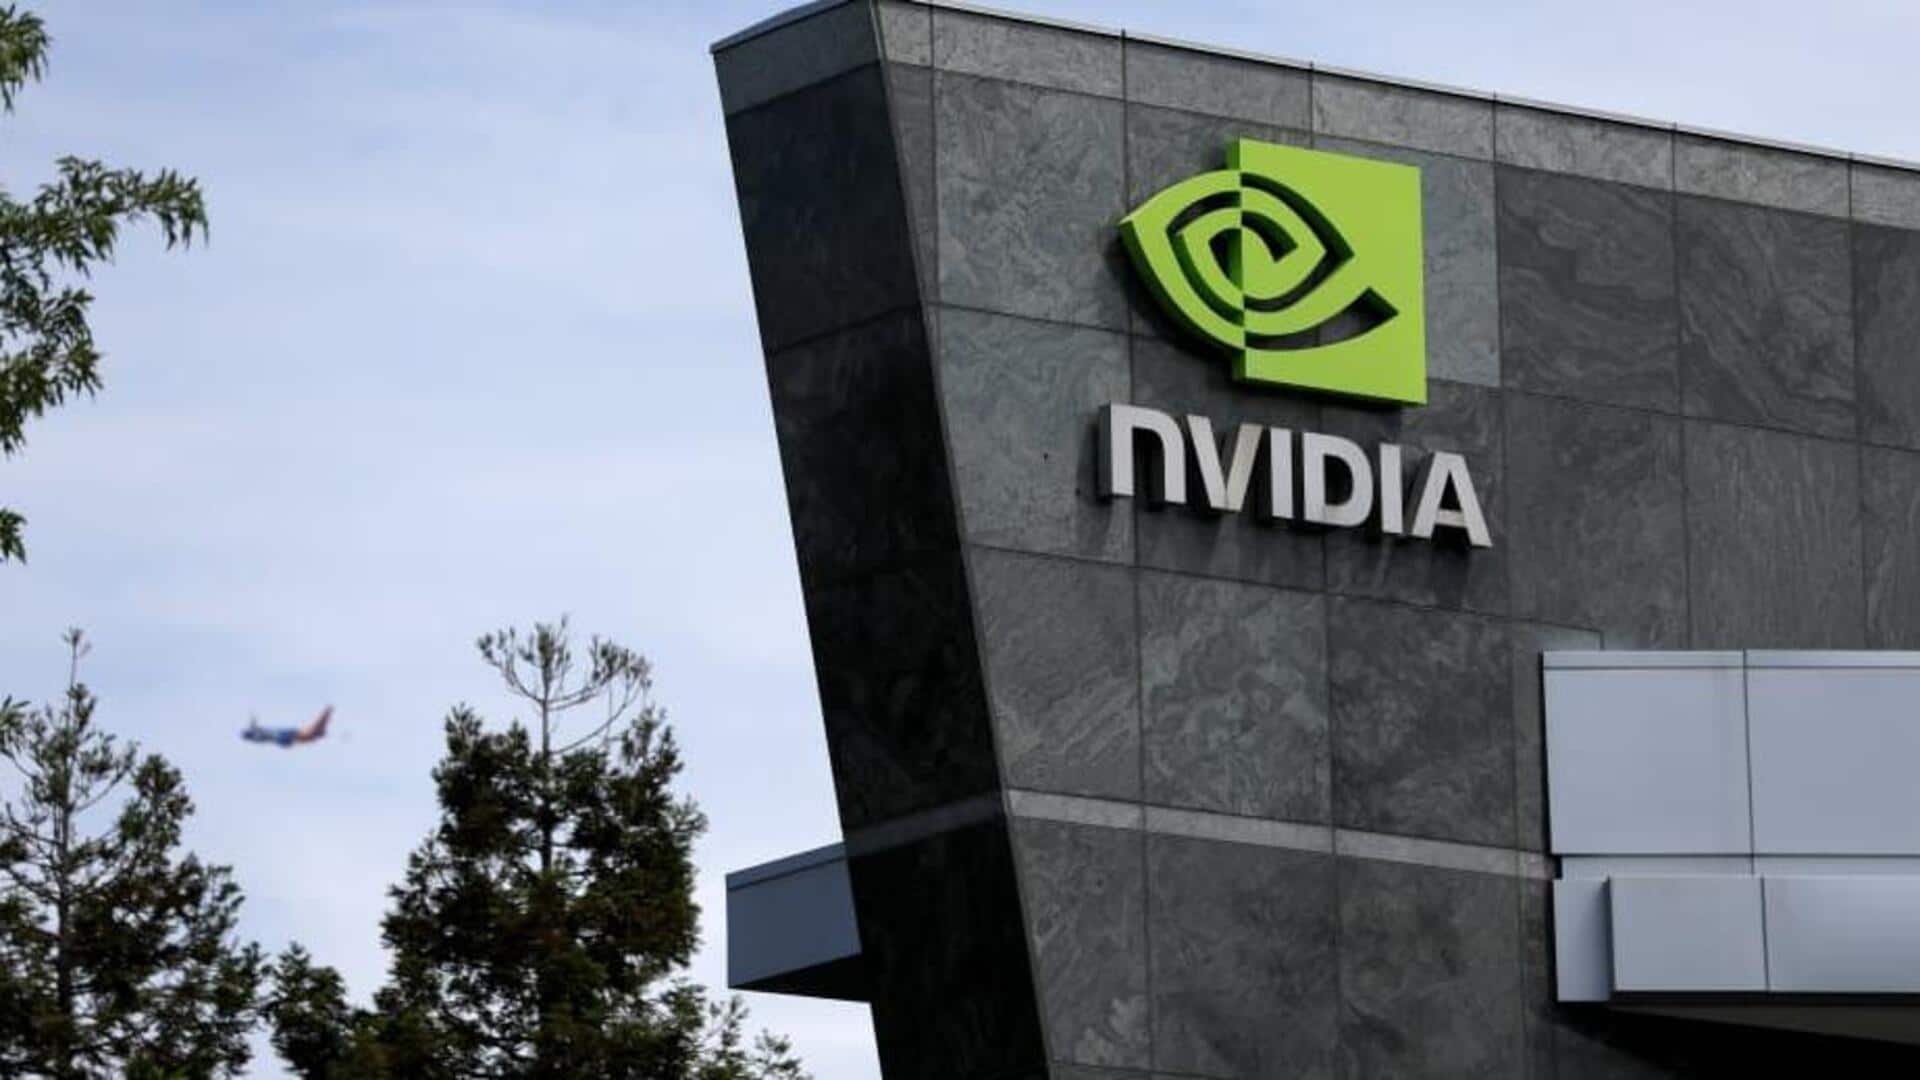 NVIDIA plans to train 50,000 Infosys employees in AI technology